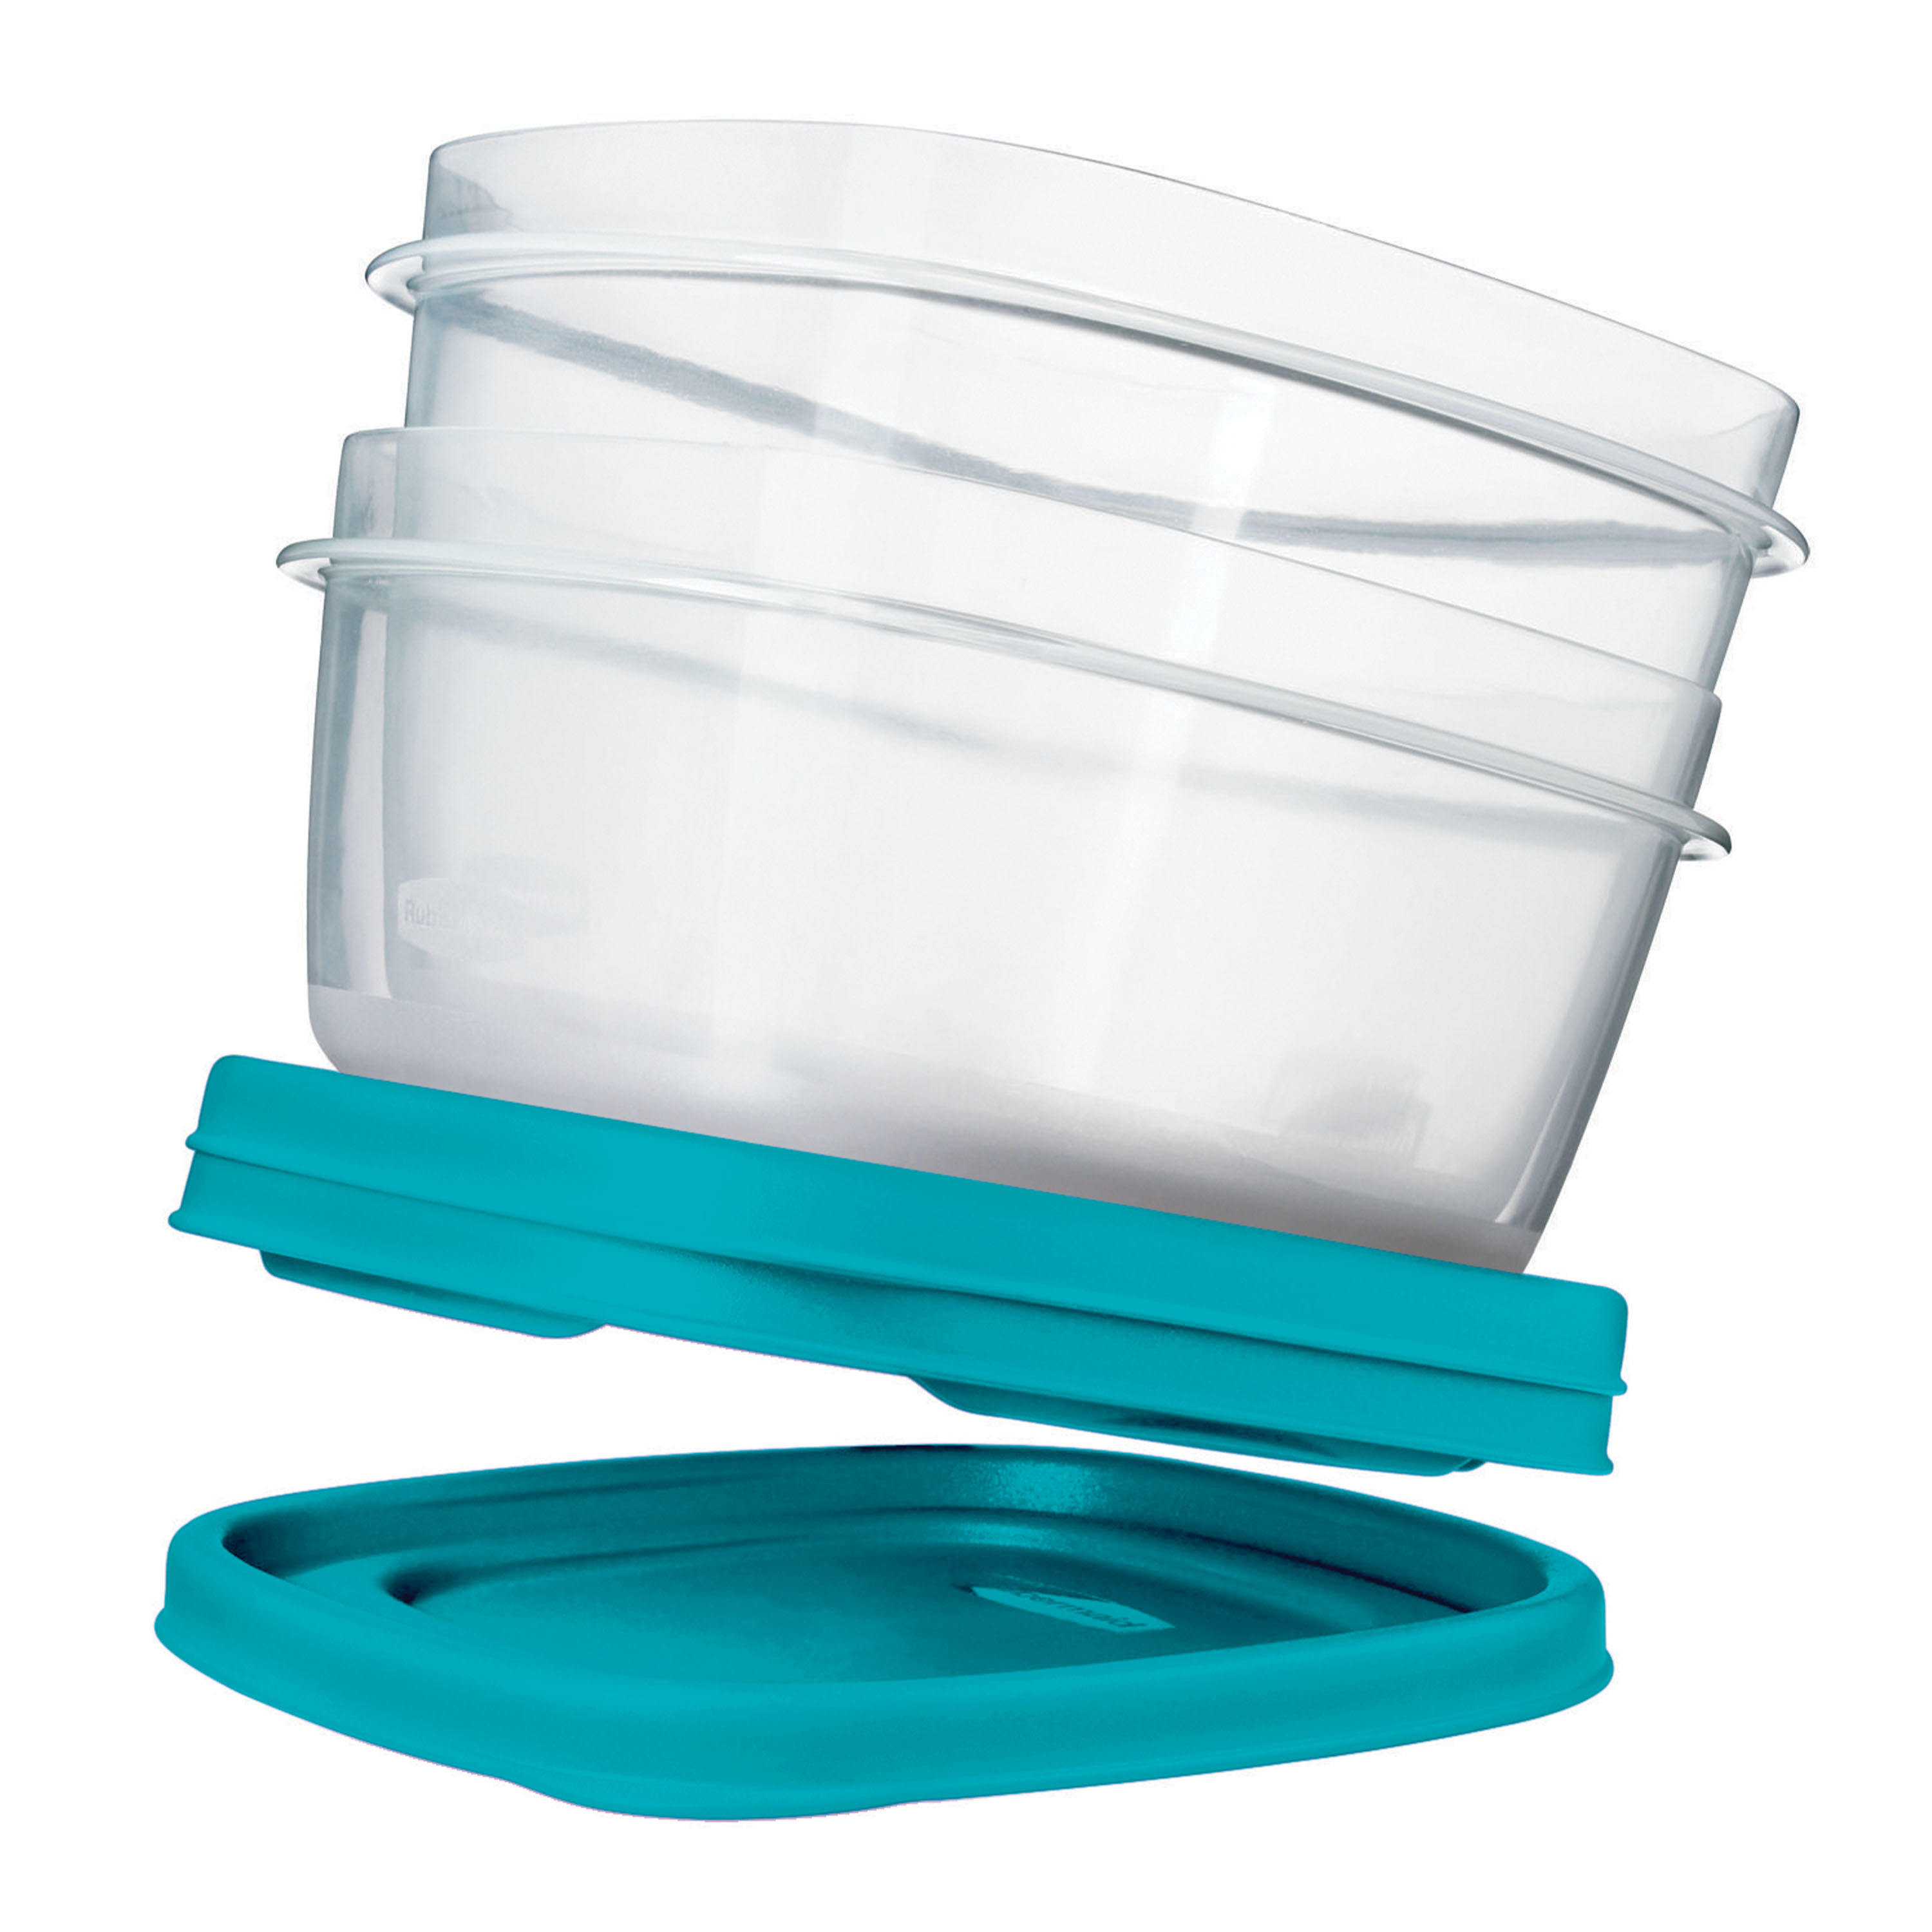 Rubbermaid Easy Find Vented Lids Food Storage Containers, 38-Piece Set, Teal - image 6 of 7